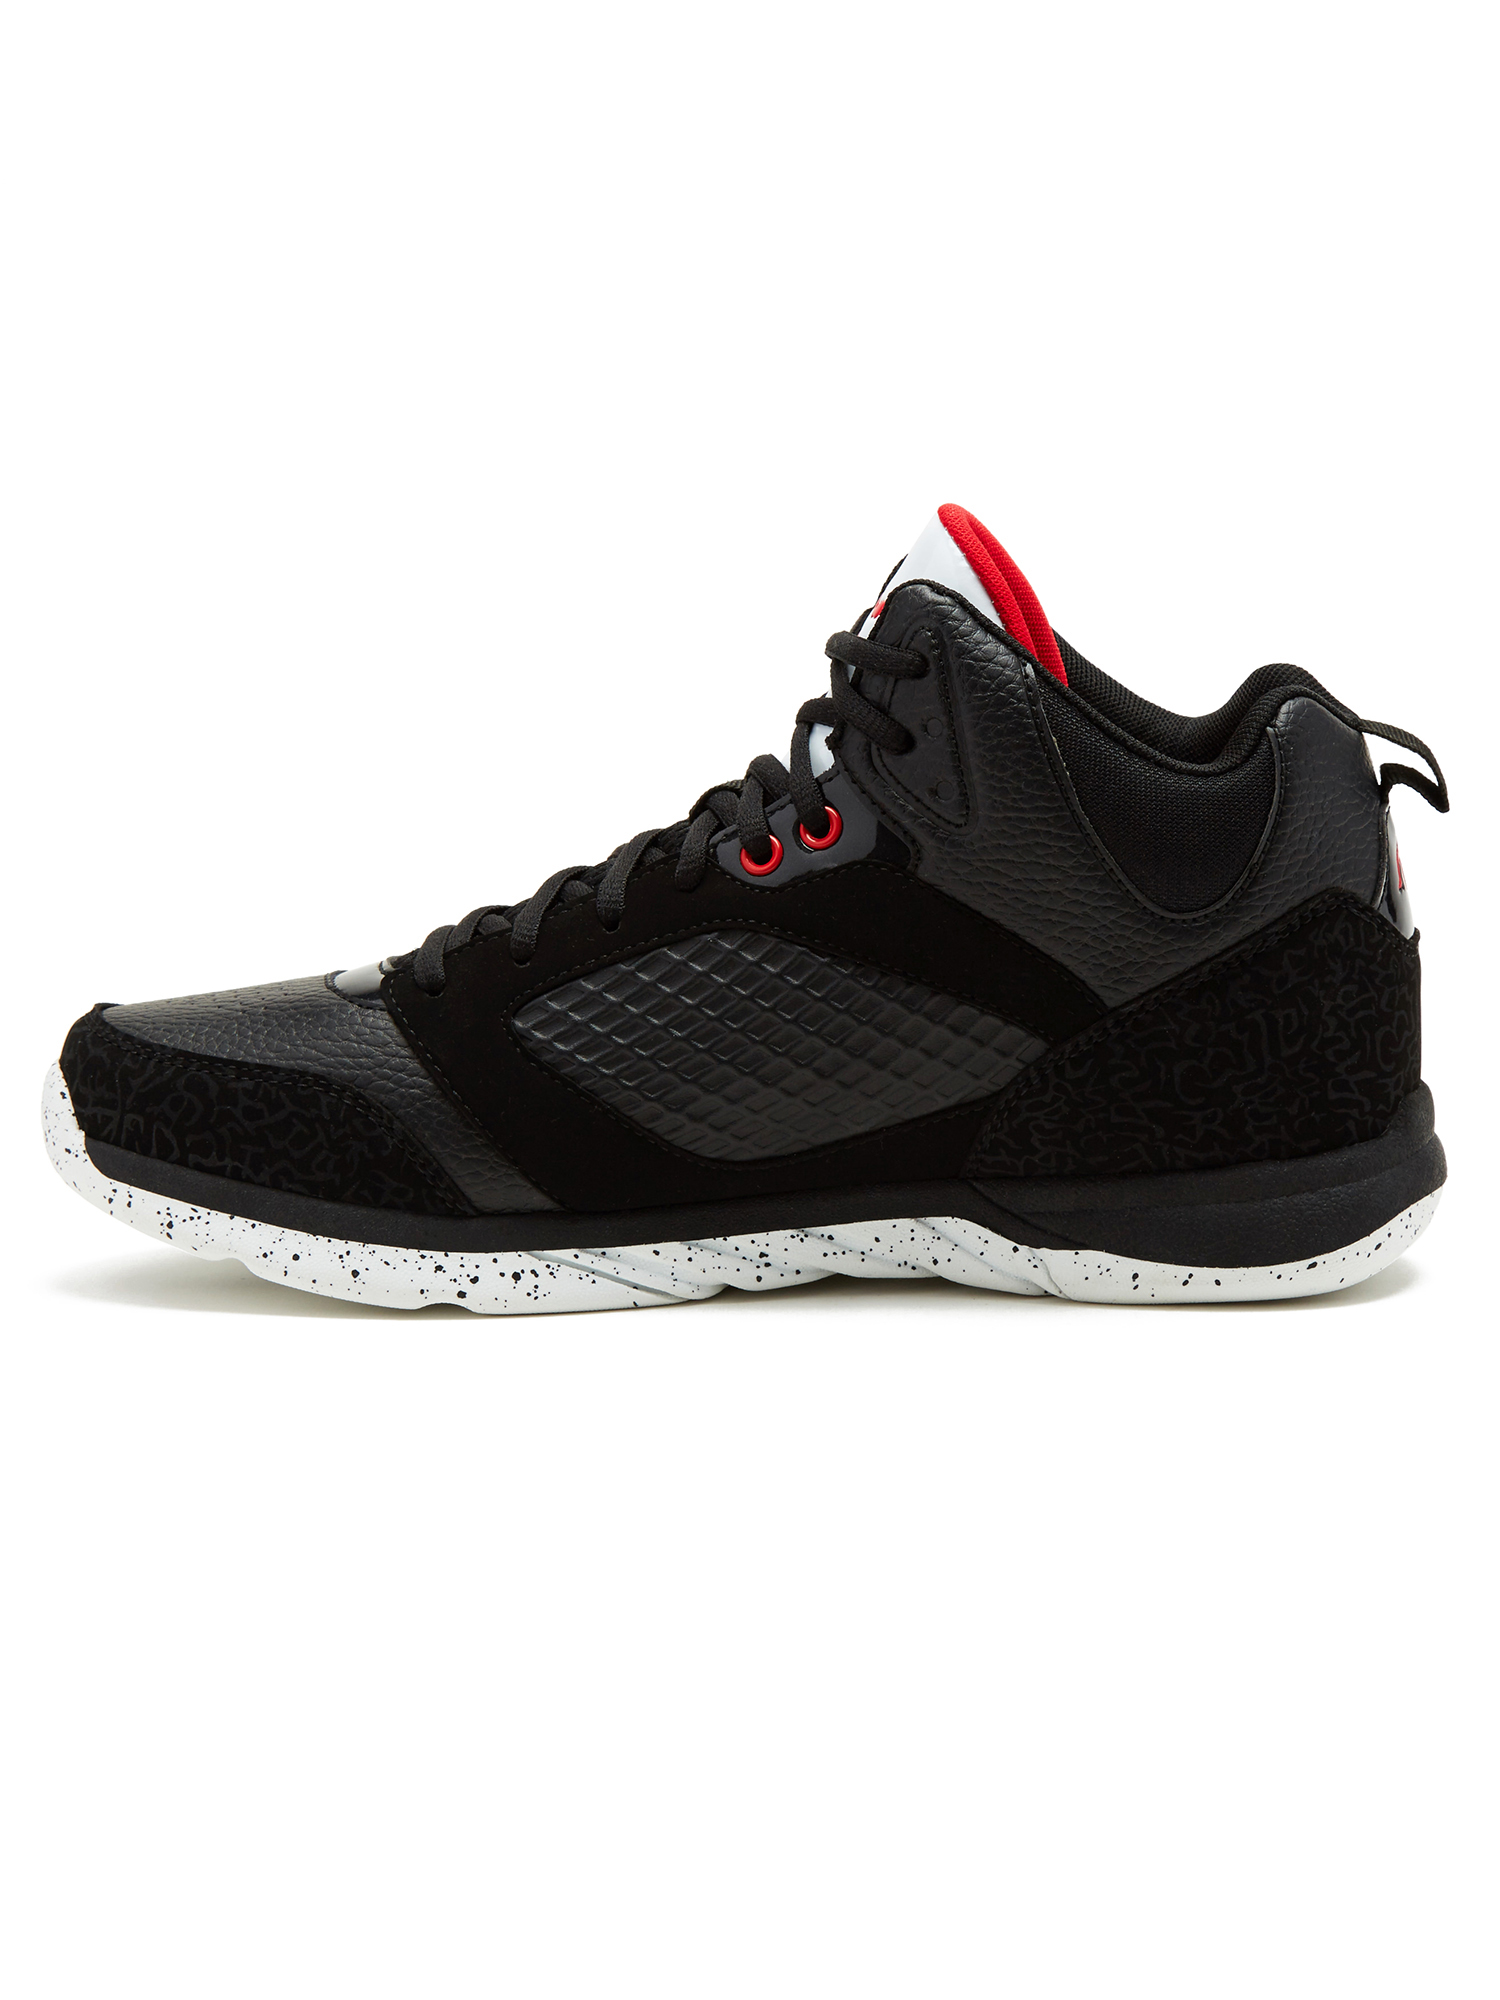 AND1 Men's Capital 2.0 Athletic Shoe - image 2 of 5